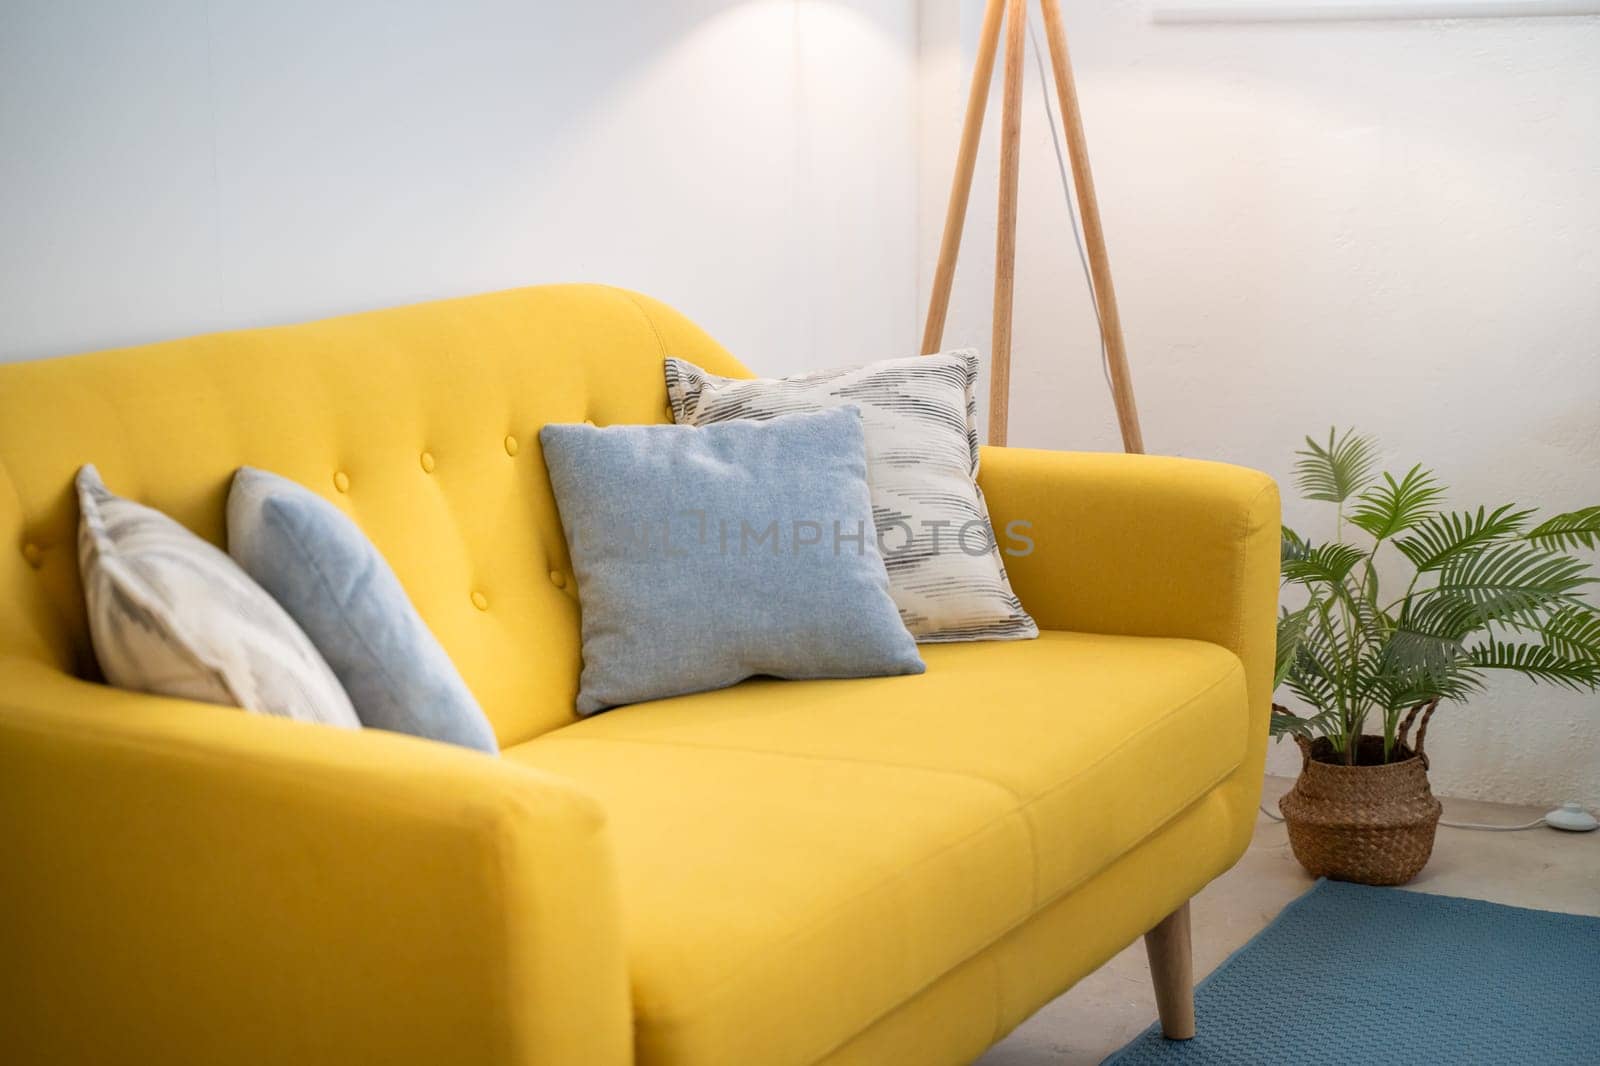 Interior design featuring a yellow couch in a living room industrial loft. by PaulCarr